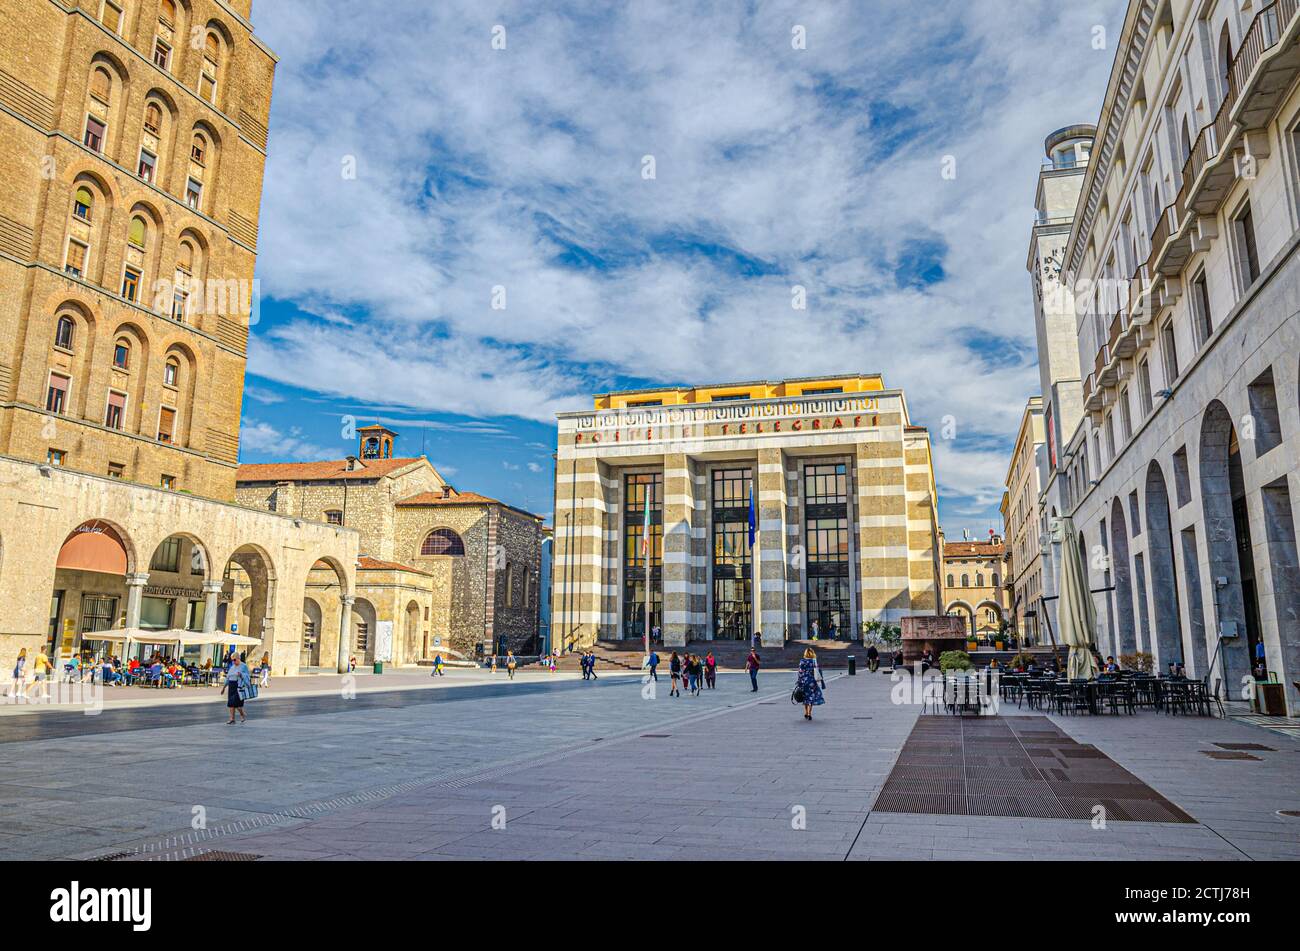 Brescia, Italy, September 11, 2019: Post Office building, Torrione INA or INA Tower skyscraper on Piazza della Vittoria Victory Square with Art Deco Rationalism style building, city historical centre Stock Photo